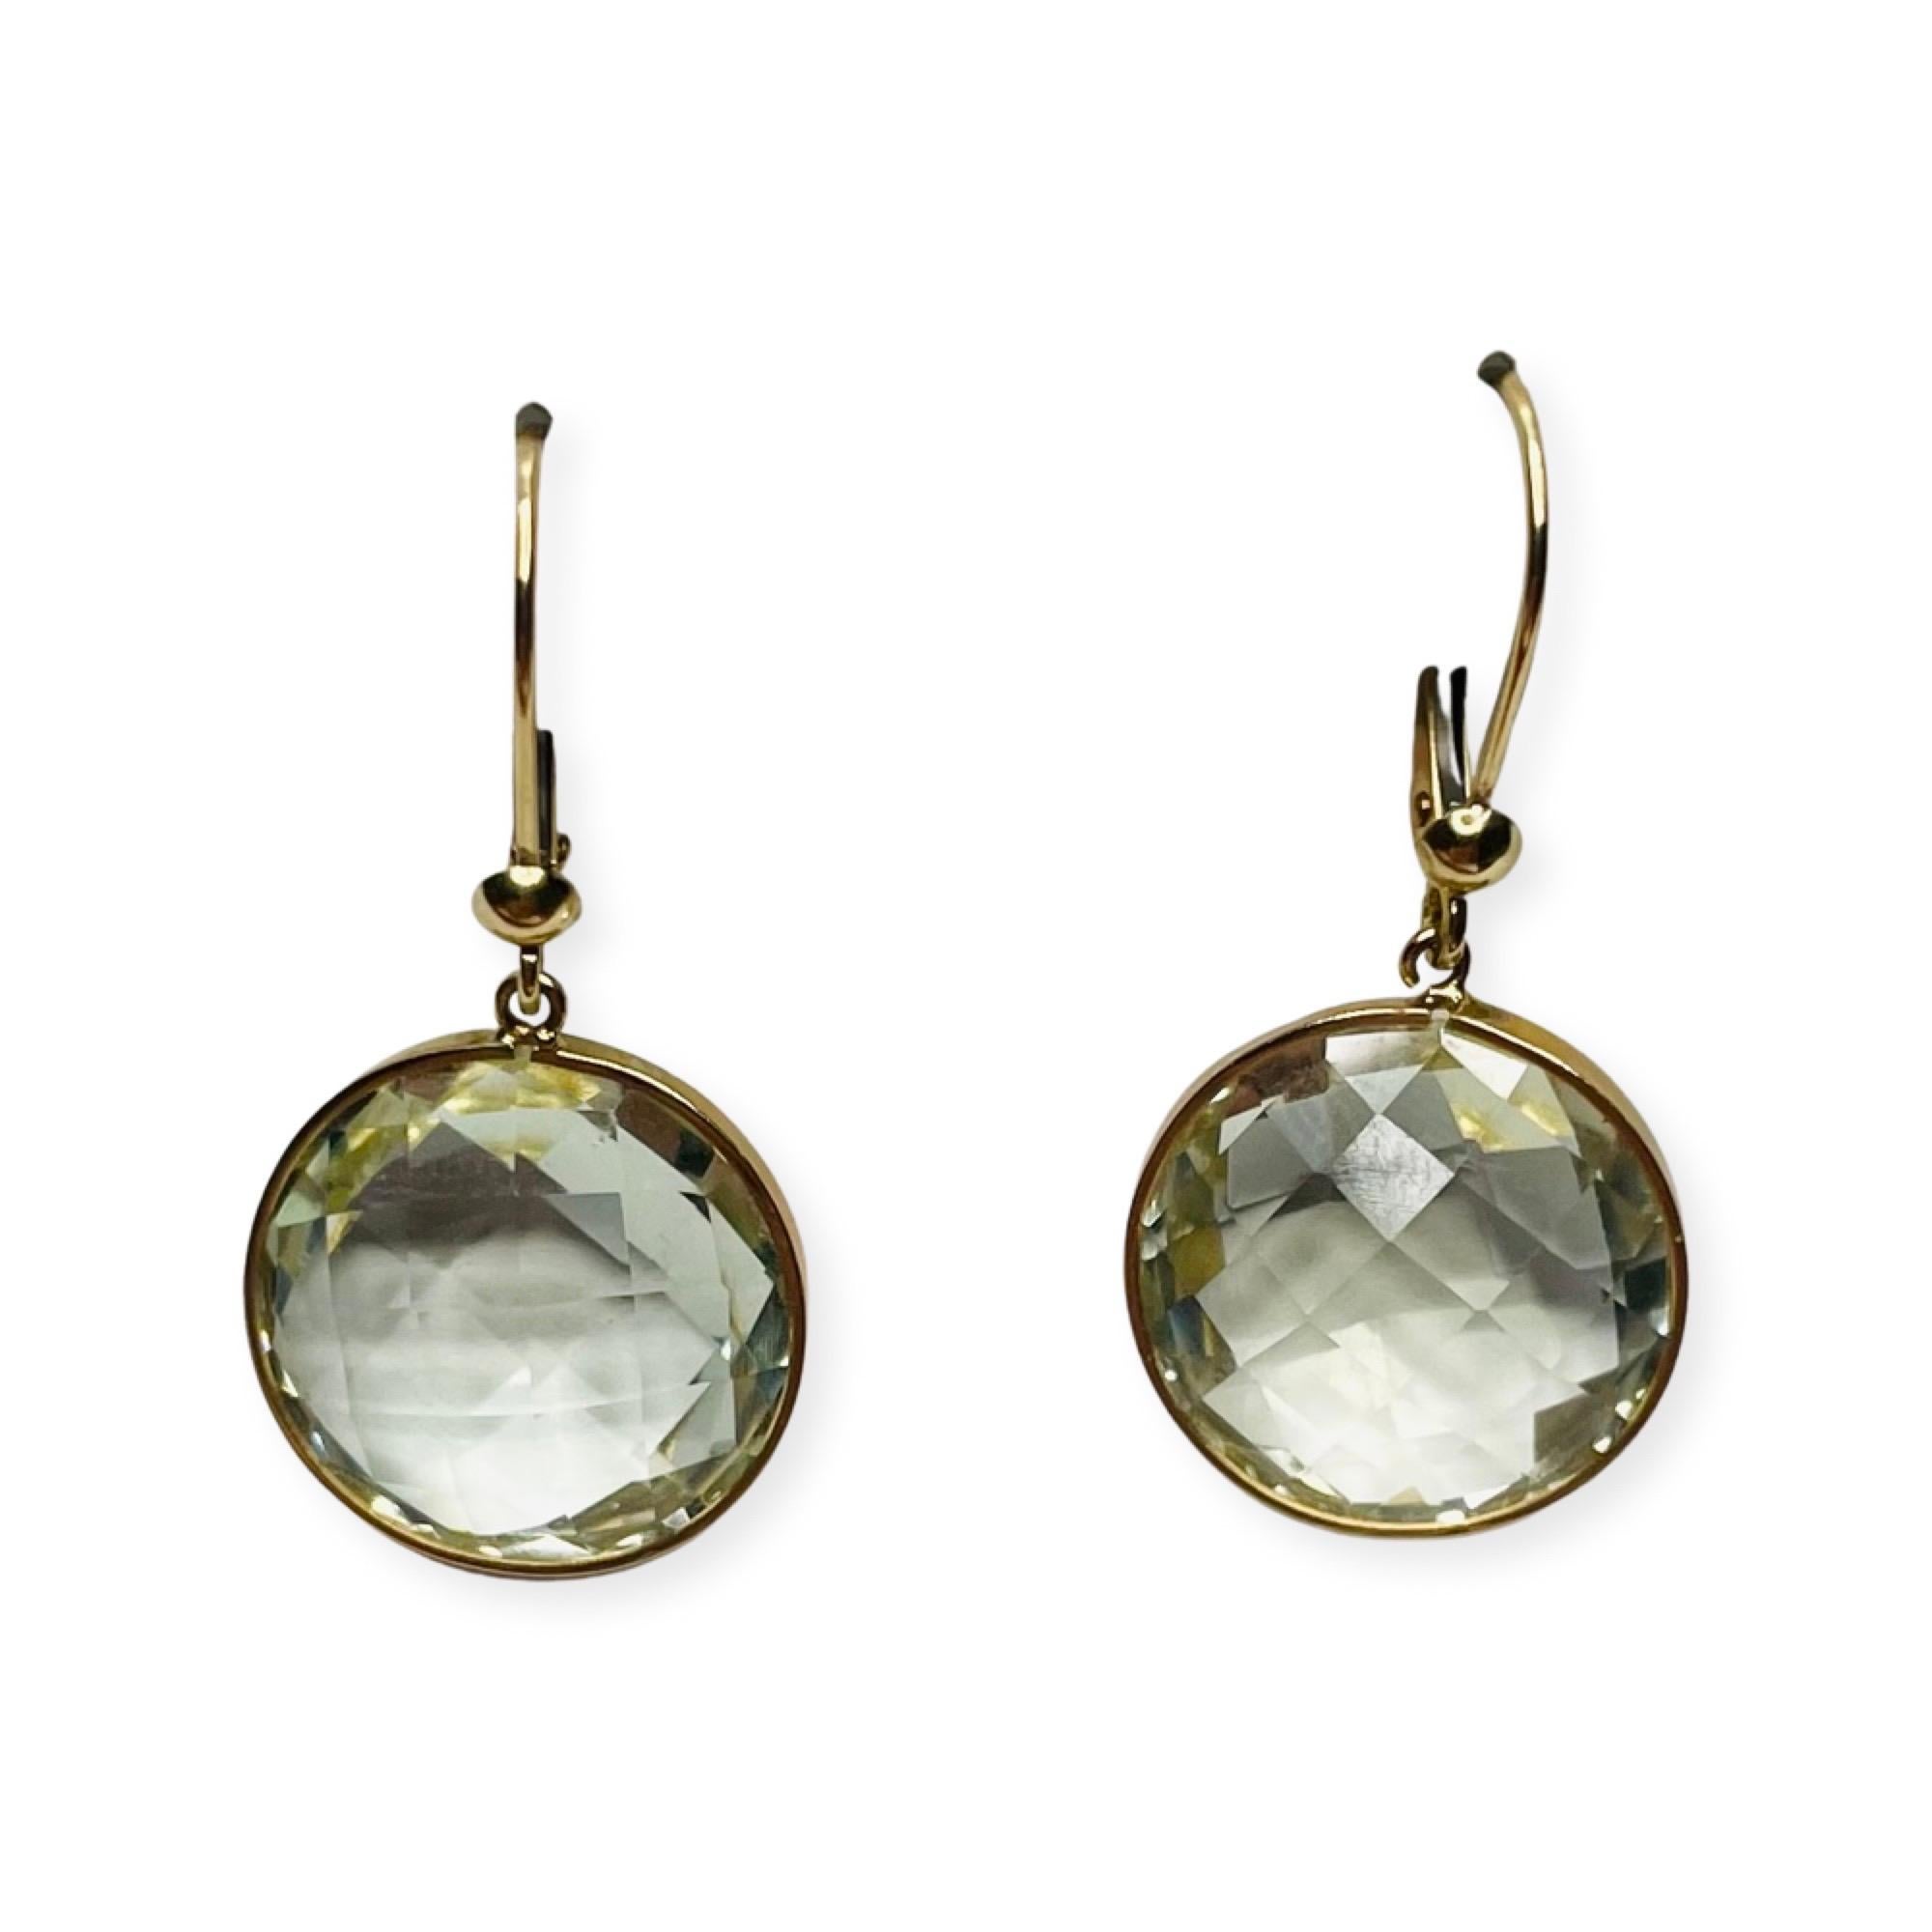 Lithos 14K Yellow Gold Green Quartz Earrings. The stones are checkerboard cut. They are 15.68 mm in diameter and bezel set. They hang from French wires. 
400-70-835